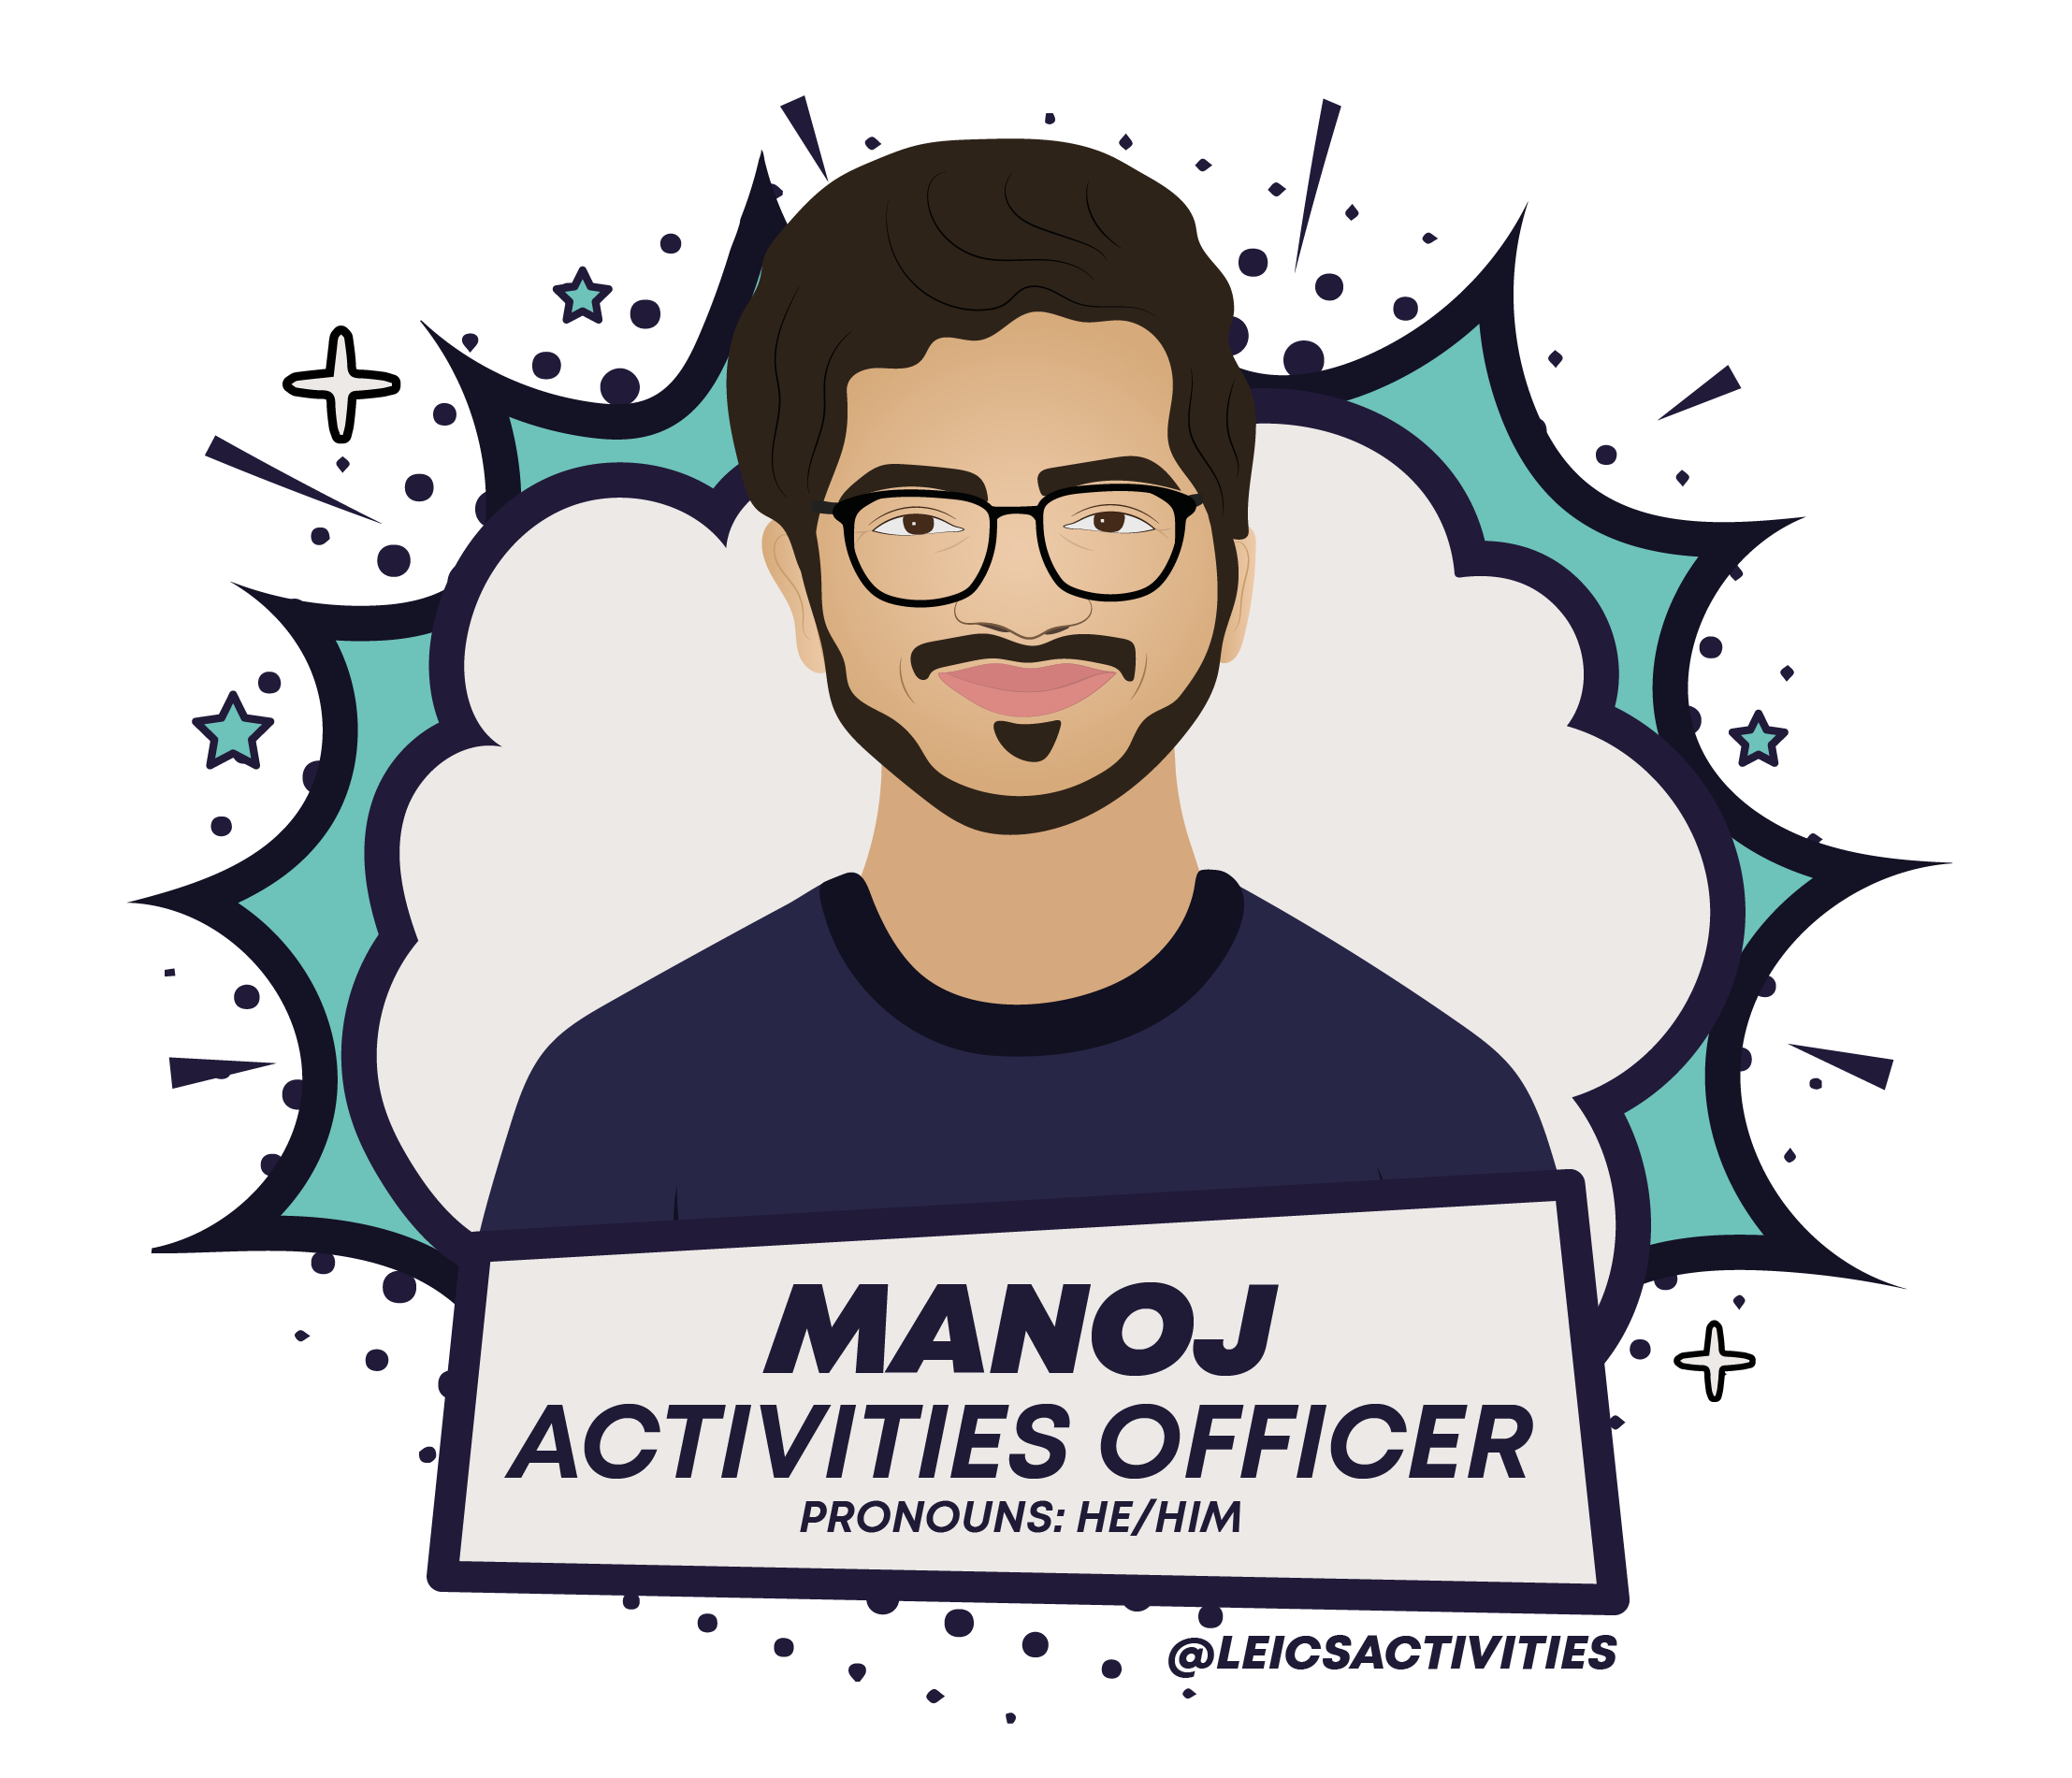 Image of Manoj Kanikanti, Activities Officer he/him - click to view his profile